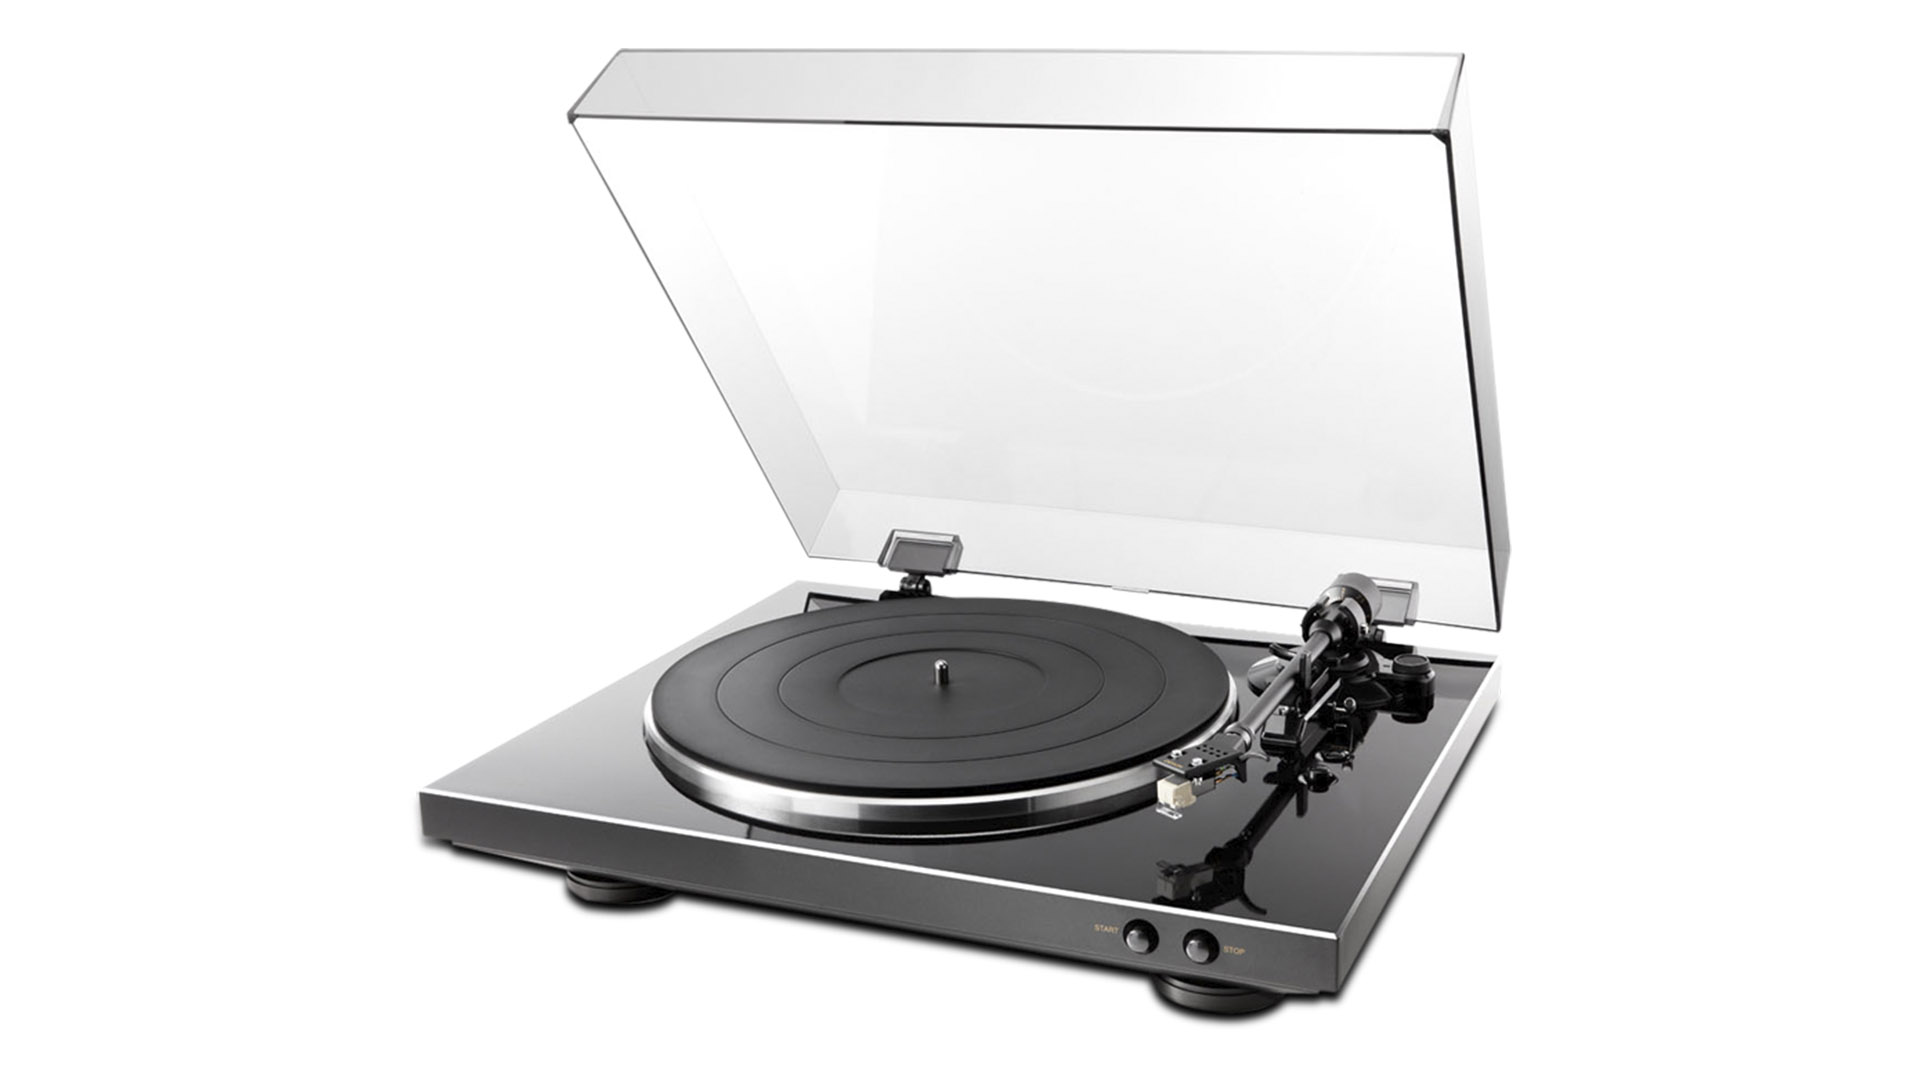 The Denon DP-300F turntable in black and silver